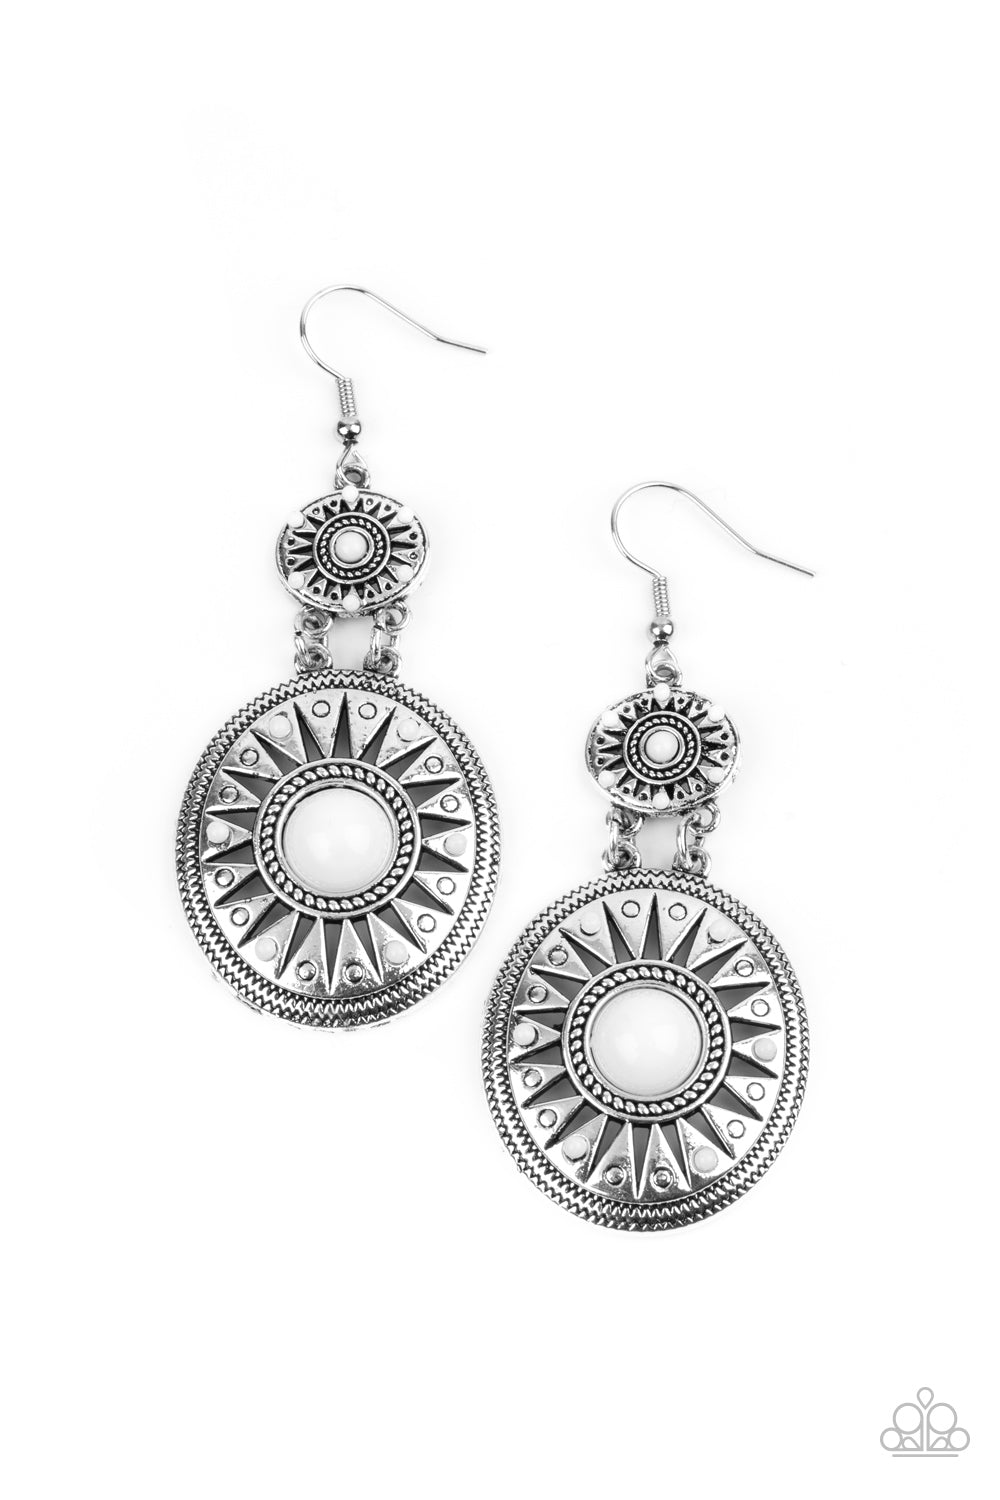 Temple of The Sun - White Earrings - Princess Glam Shop